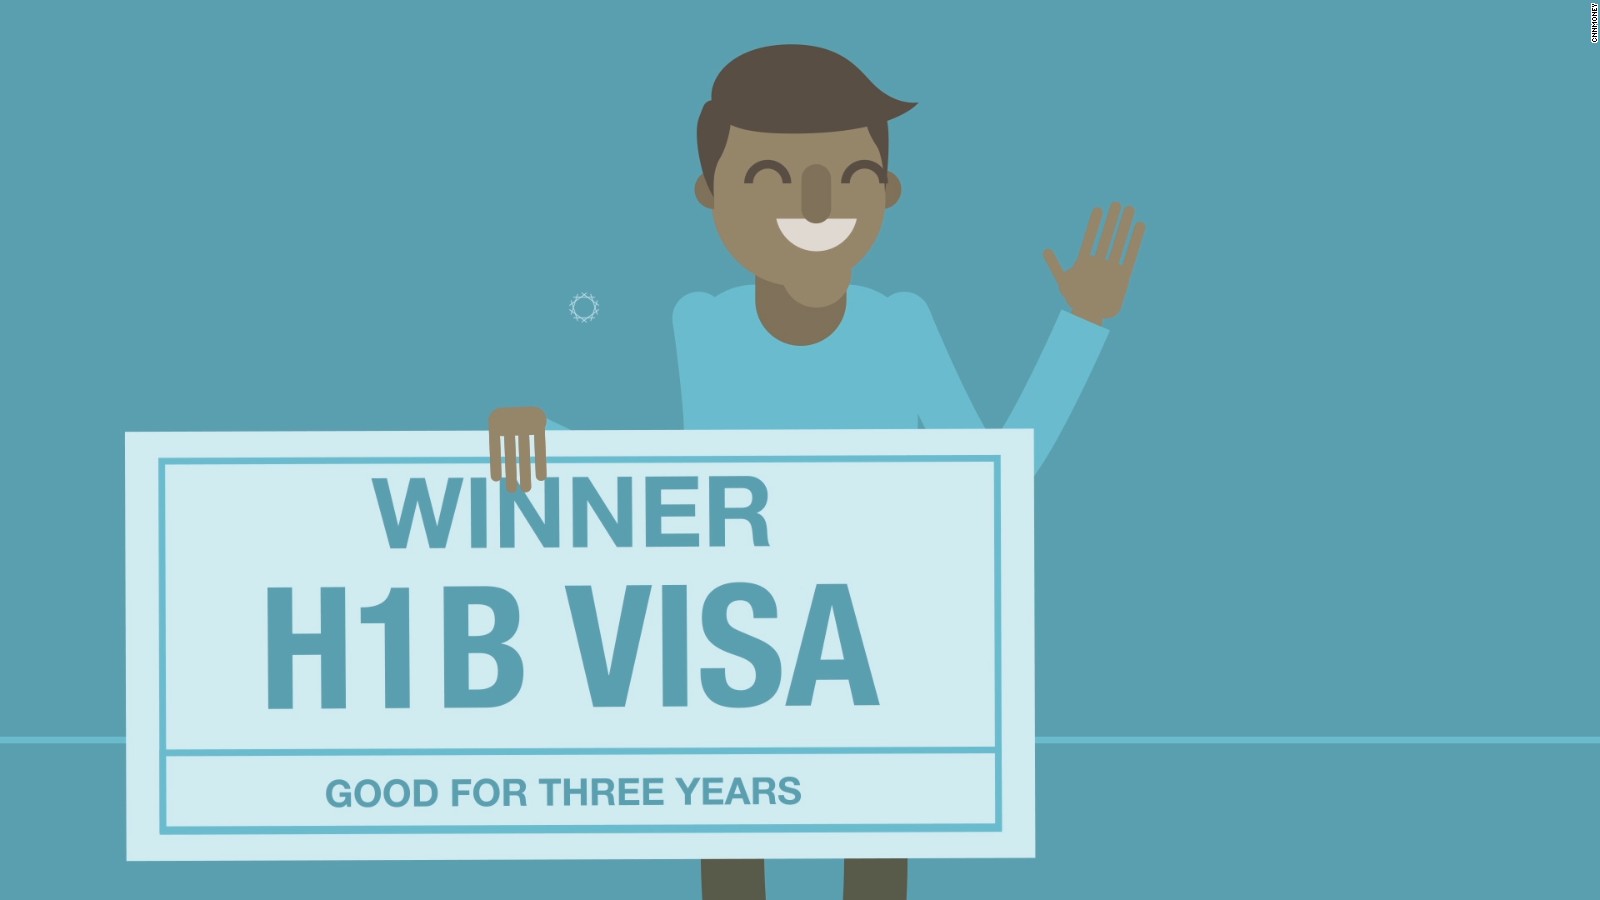 Starting a business in the US just made easy with these Work visa